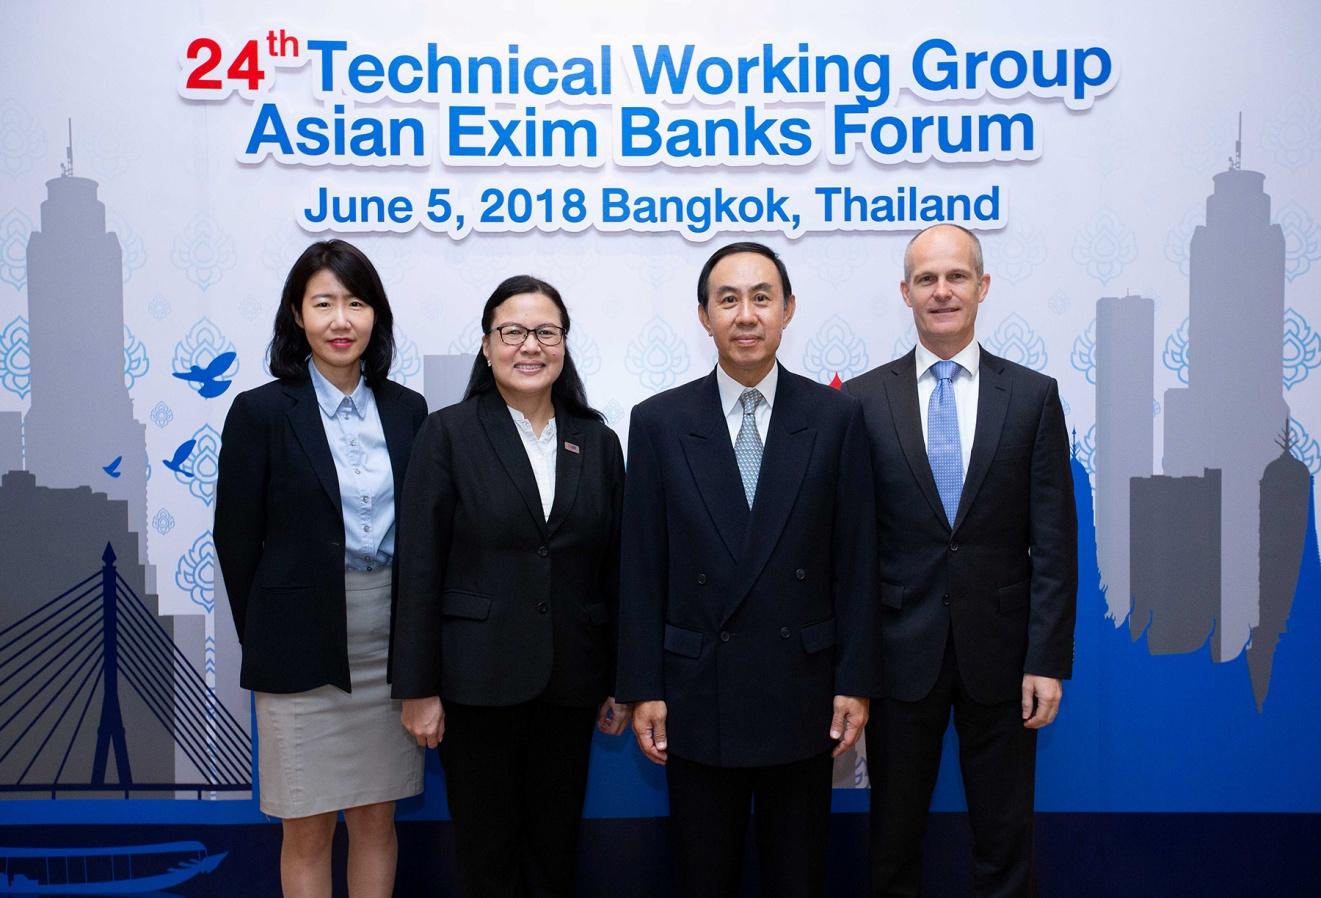 EXIM Thailand Hosted 24th Asian EXIM Banks Forum Technical Working Group to Promote Trade and Investment in Asia